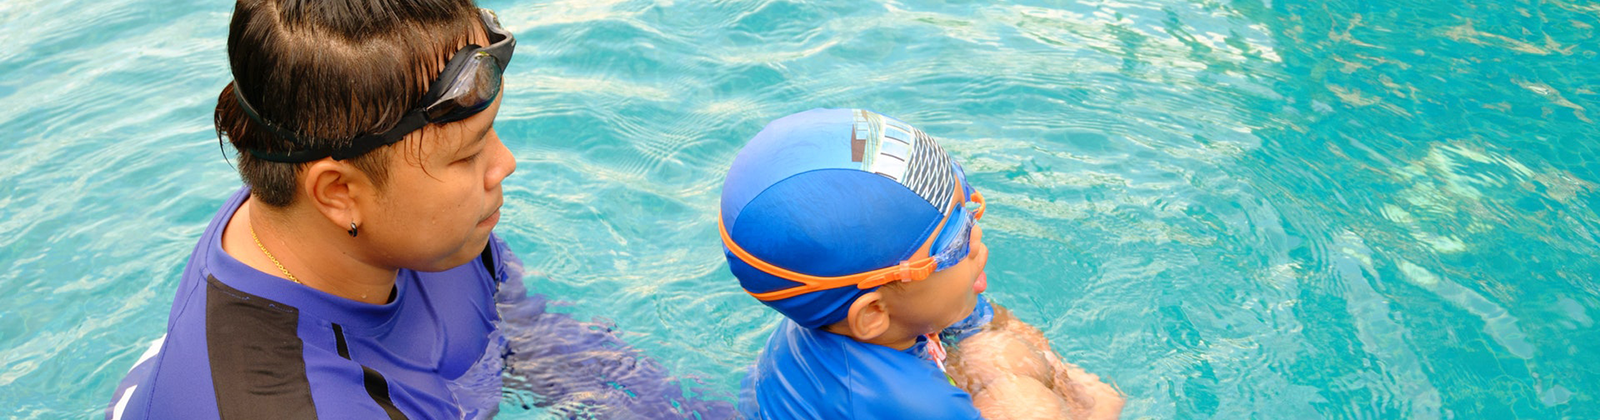 An adult is holding a child in the water. The child is deeply inhaling before going under the water and they are wearing goggles and a cap.